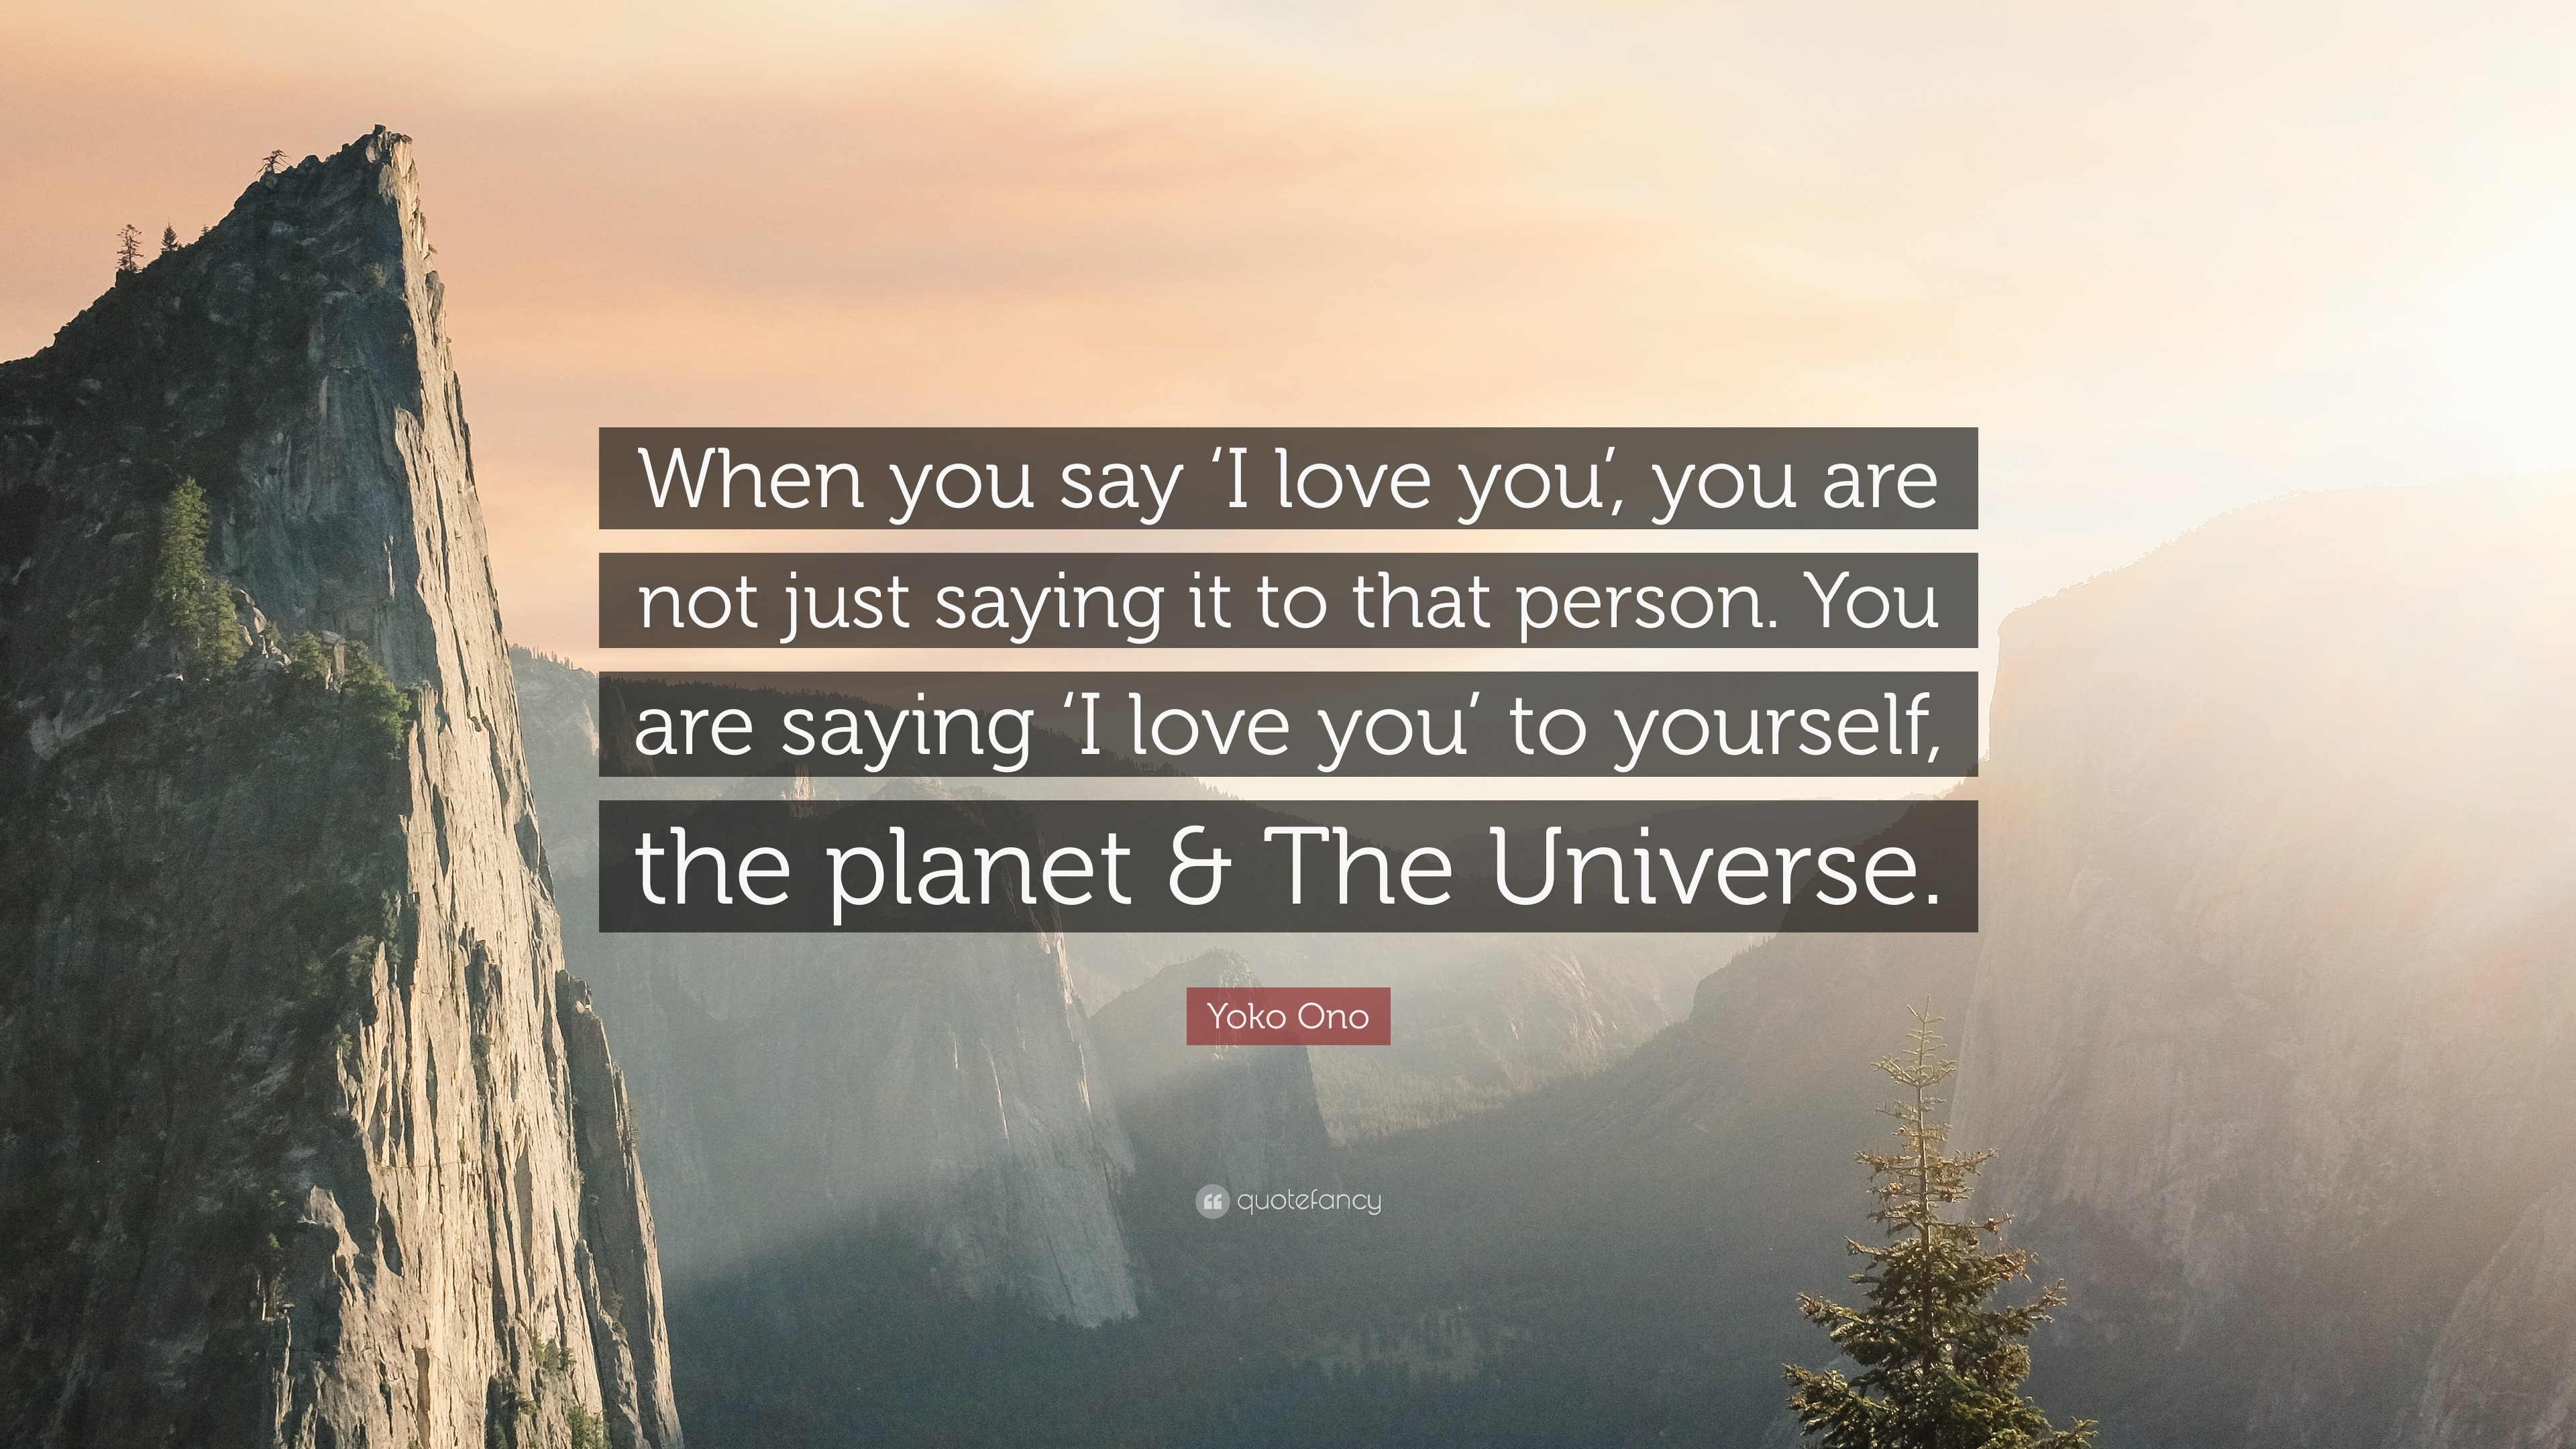 Yoko Ono Quote When You Say I Love You You Are Not Just Saying It To That Person You Are Saying I Love You To Yourself The Plane 10 Wallpapers Quotefancy